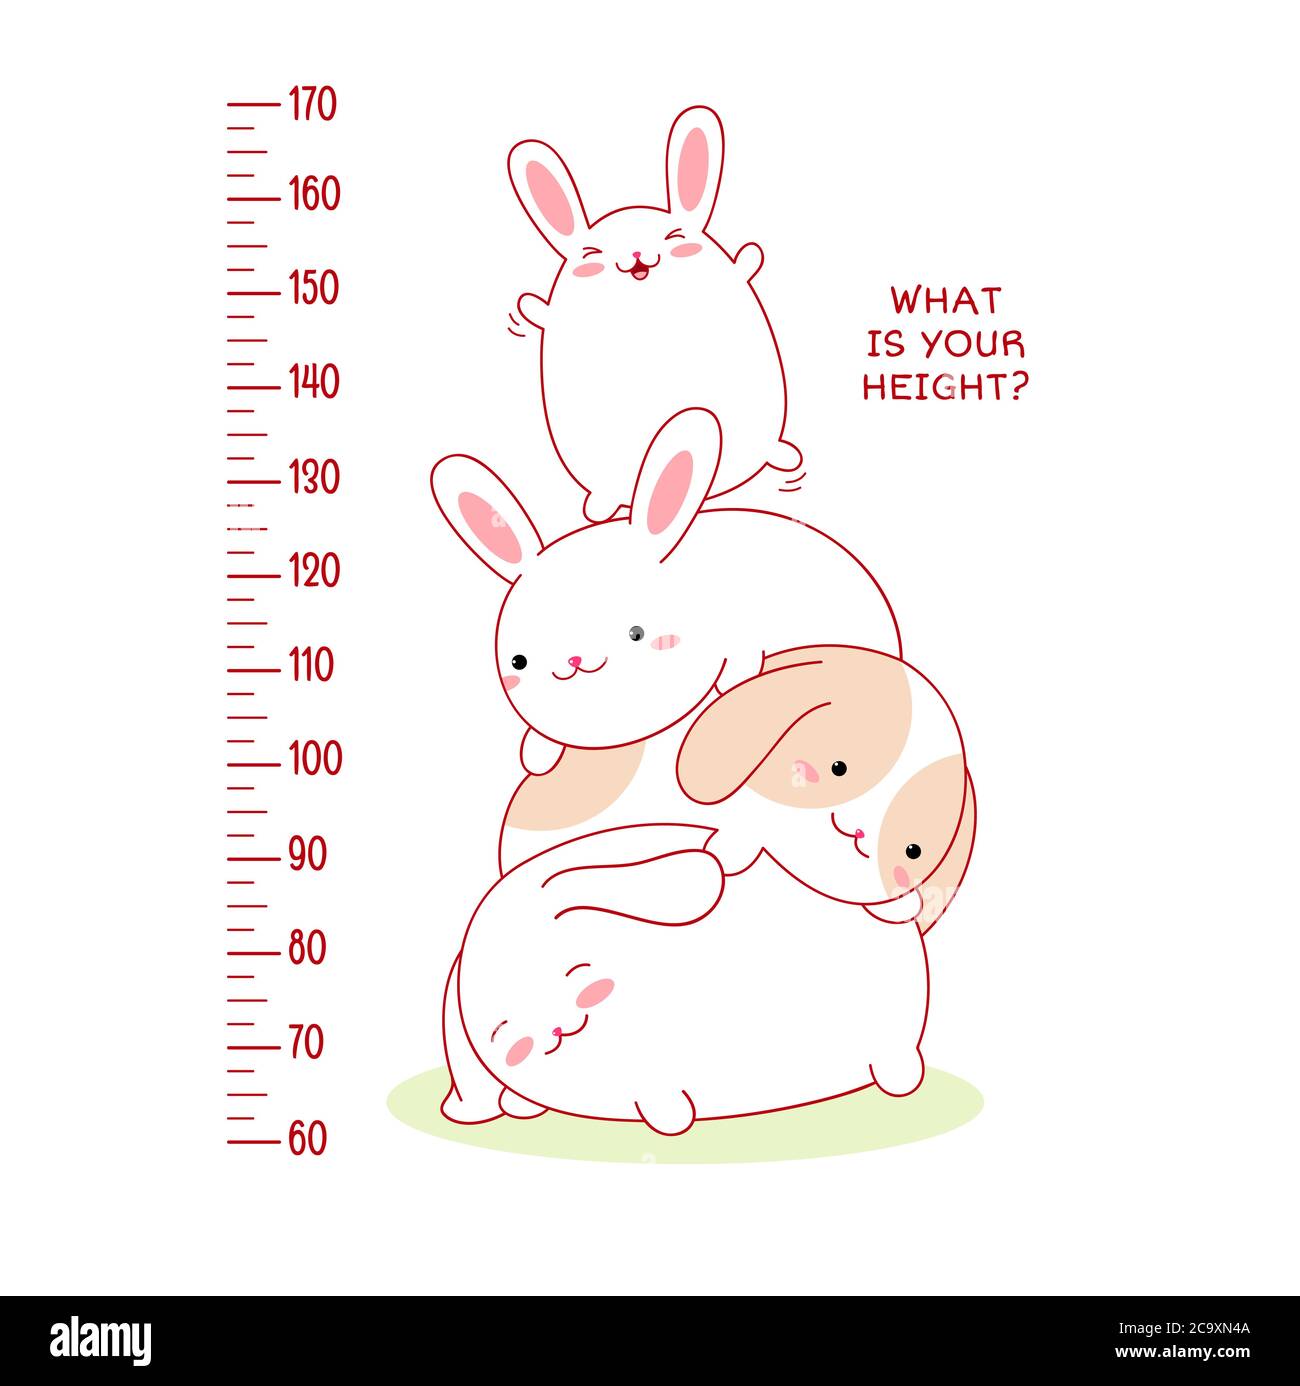 https://c8.alamy.com/comp/2C9XN4A/height-chart-with-cute-baby-rabbit-kids-meter-with-cartoon-animals-inscription-what-is-your-height-meter-wall-or-baby-scale-of-growth-vector-eps-2C9XN4A.jpg